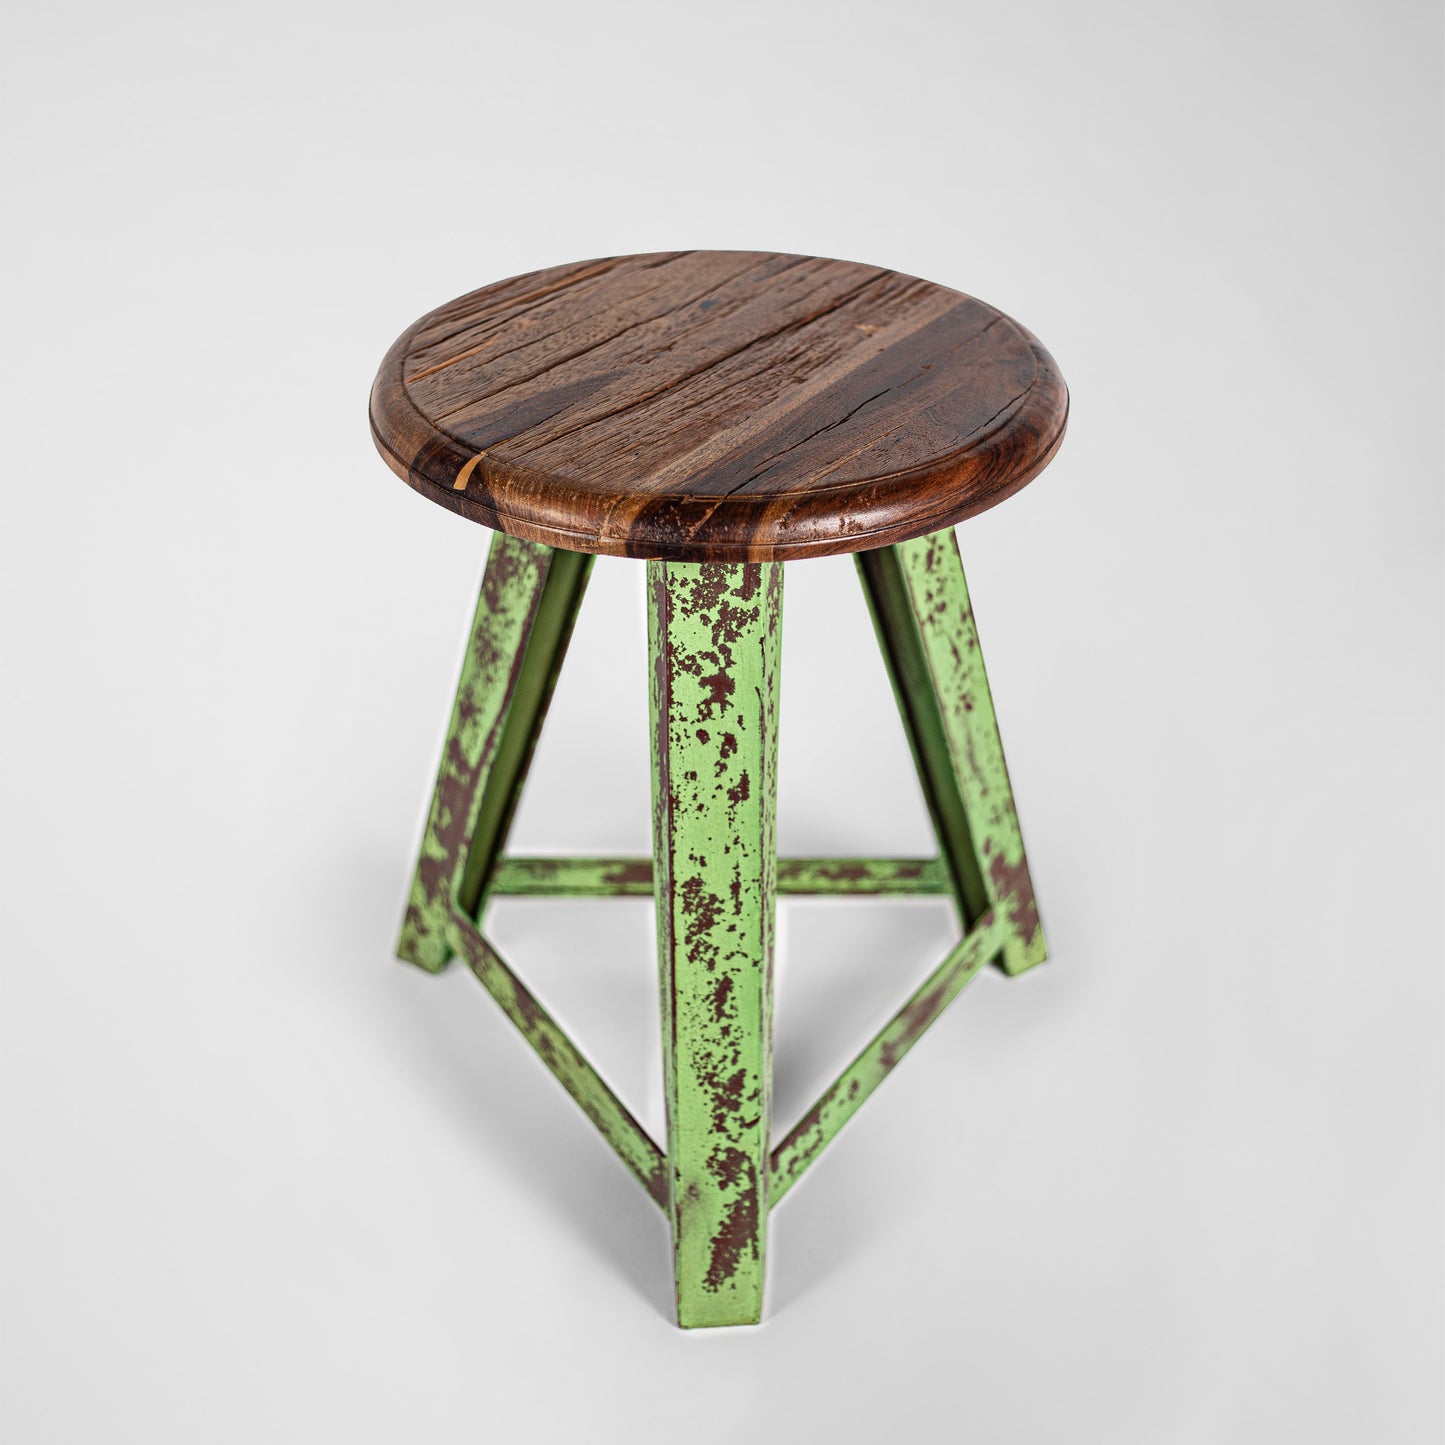 Hank the Tank – Handmade industrial design stool made of metal with wooden seat in vintage green